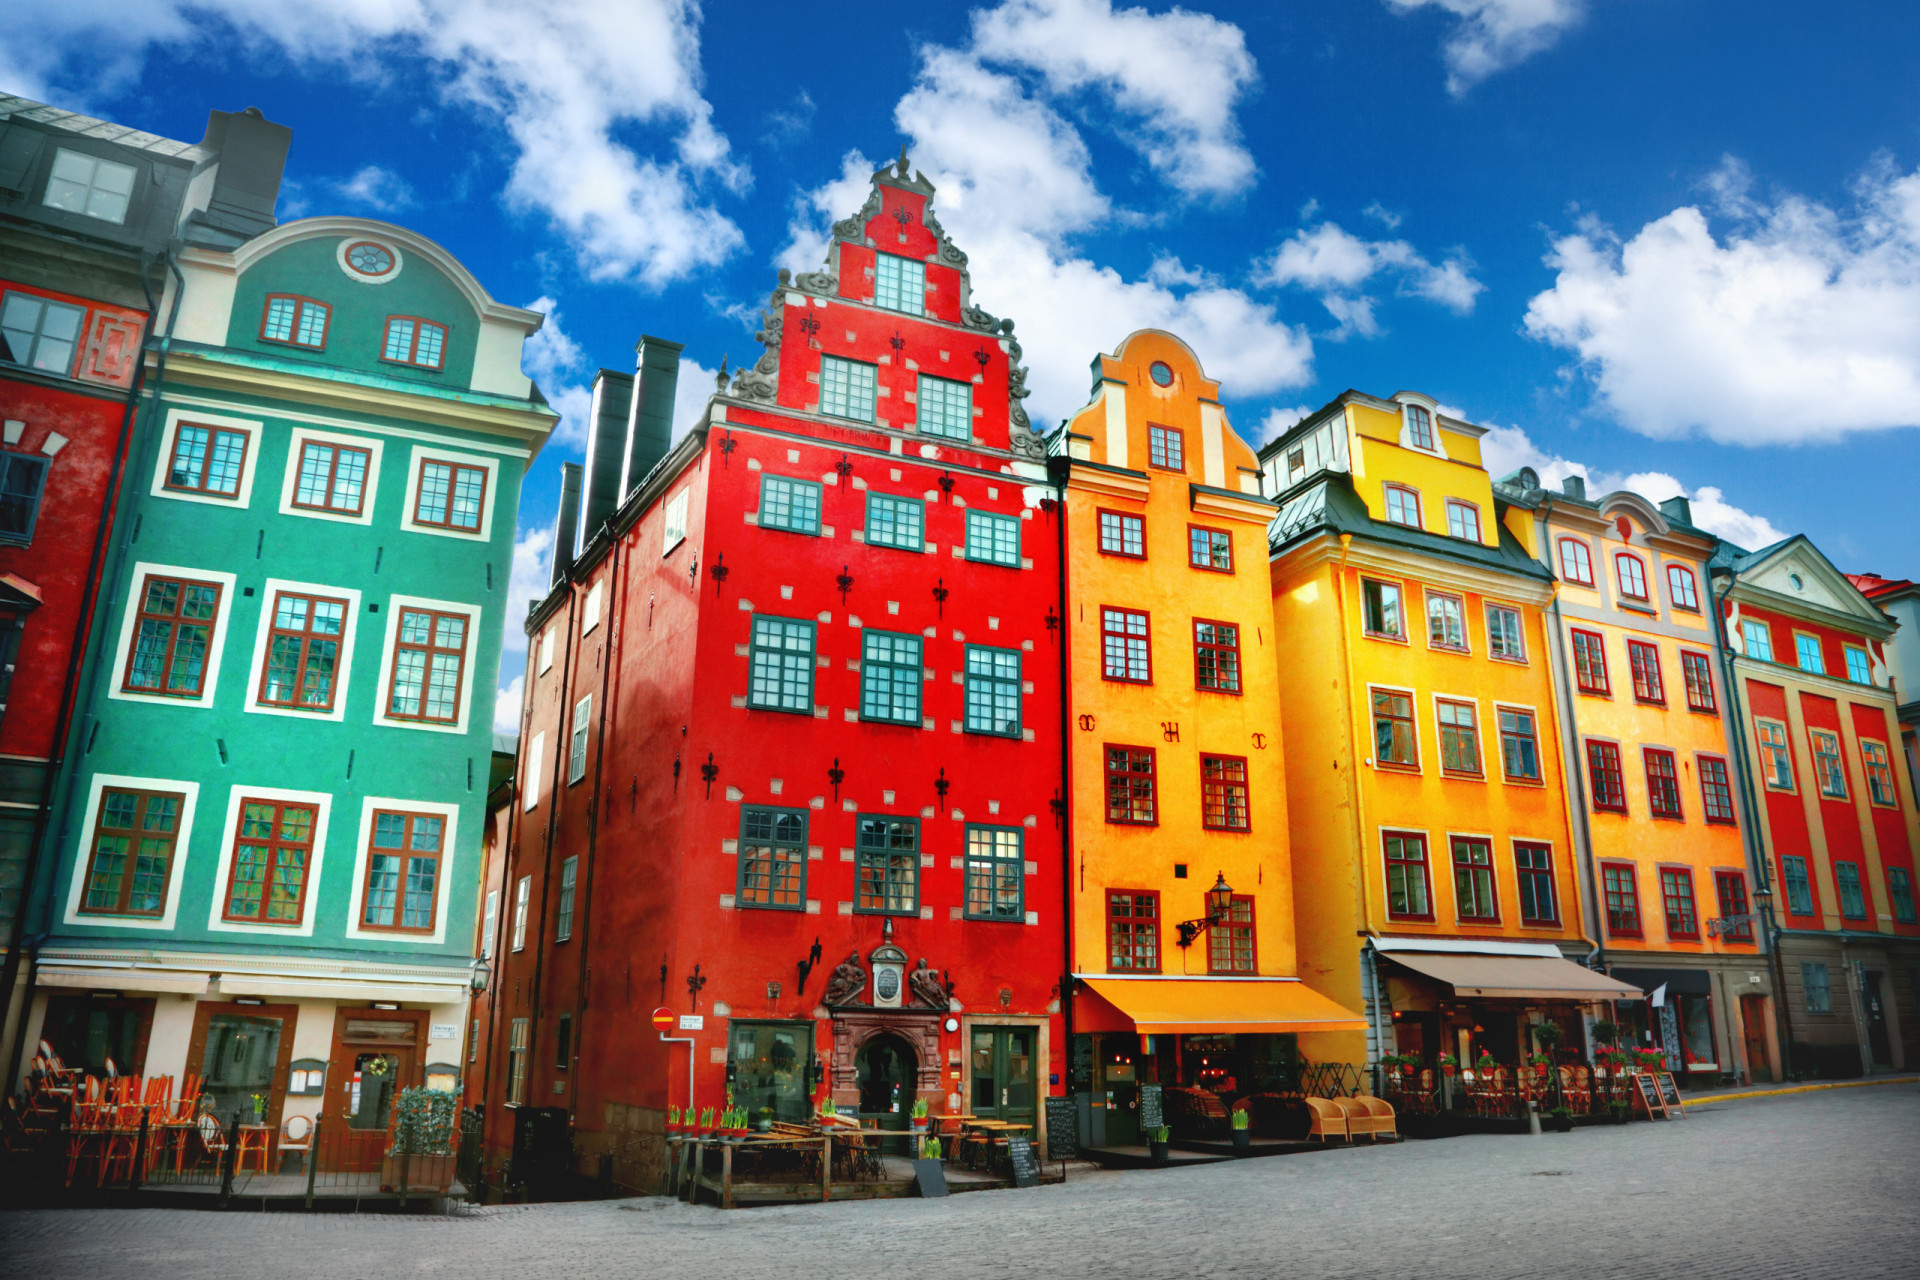 <p>Stieg Larsson's Millennium series, including 'The Girl with the Dragon Tattoo,' is set in Stockholm. Exploring the city, from the iconic Gamla Stan (Old Town) to the modern architecture of Södermalm, allows fans to follow in the footsteps of Lisbeth Salander and Mikael Blomkvist.</p><p>You may also like:<a href="https://www.starsinsider.com/n/498955?utm_source=msn.com&utm_medium=display&utm_campaign=referral_description&utm_content=639745en-us"> Historical mysteries finally solved by forensics</a></p>